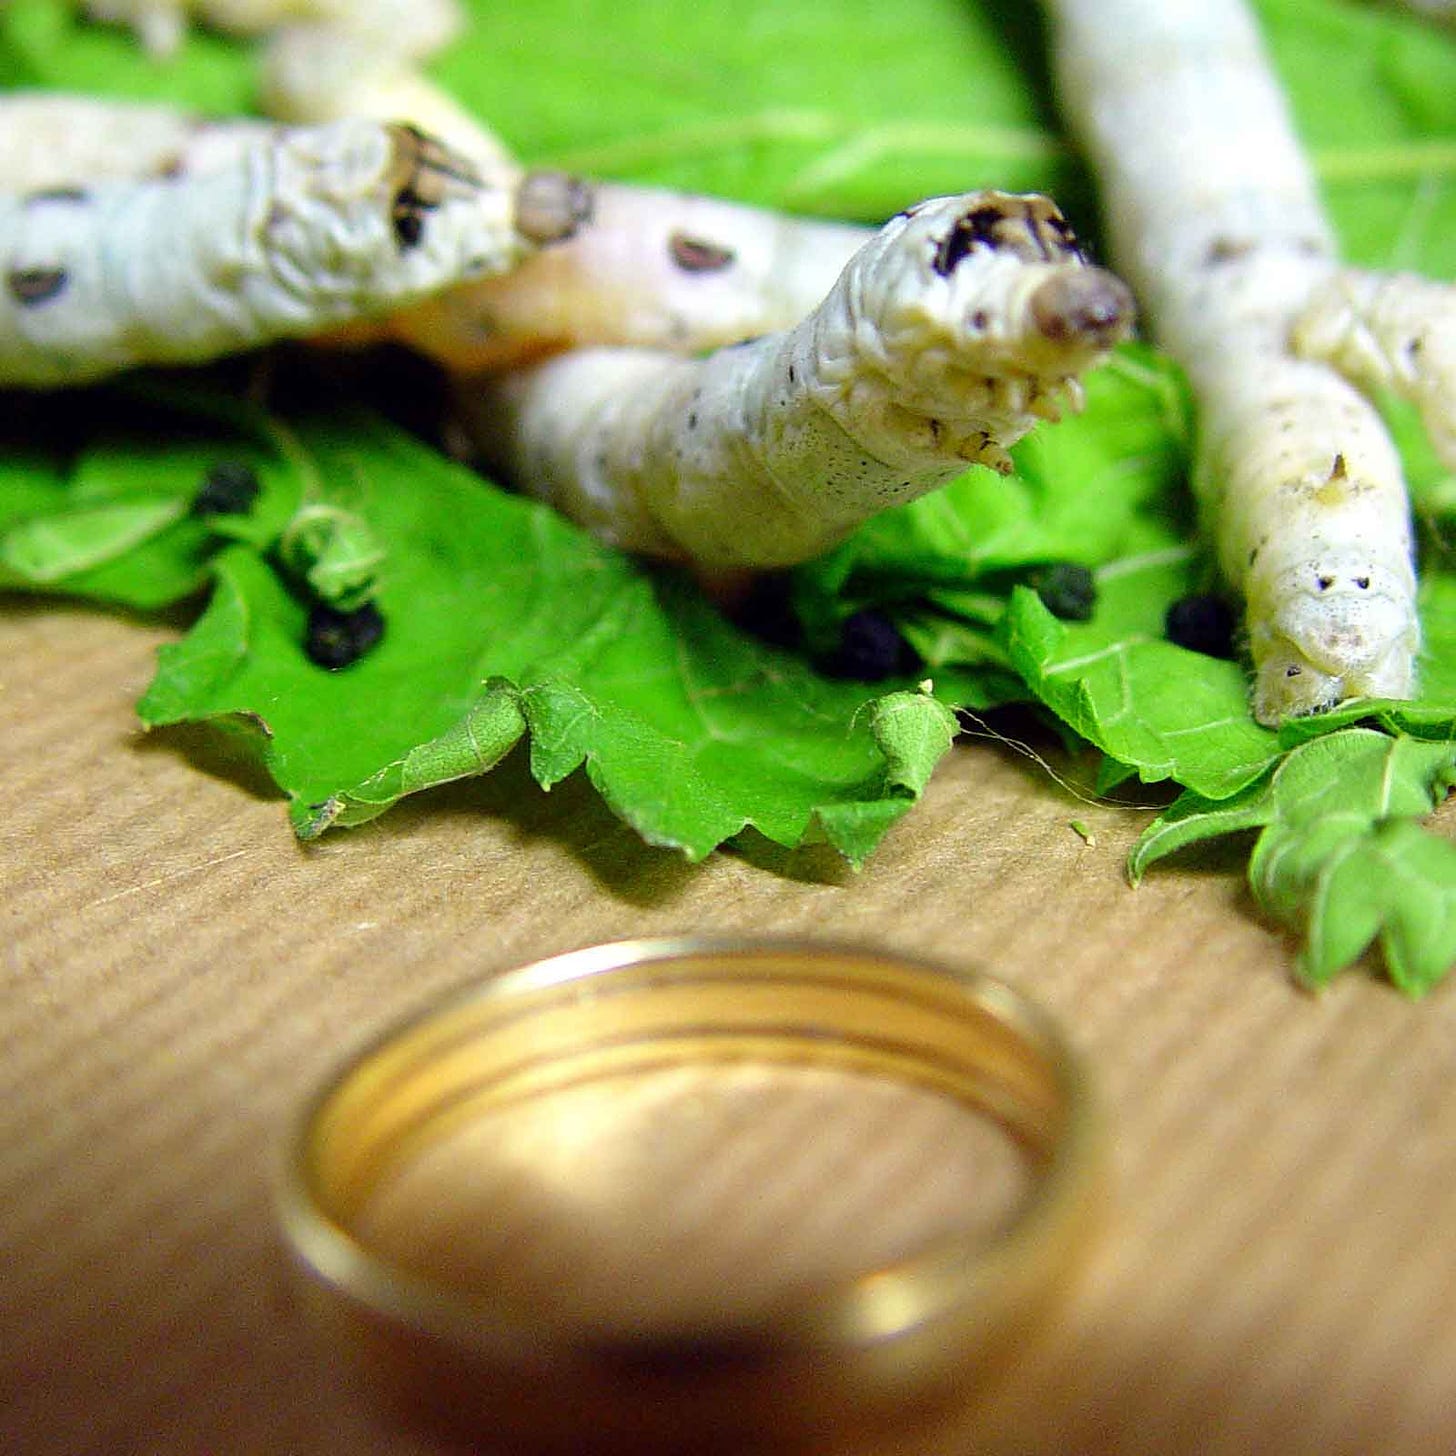 Silkworms on mulberry leaves